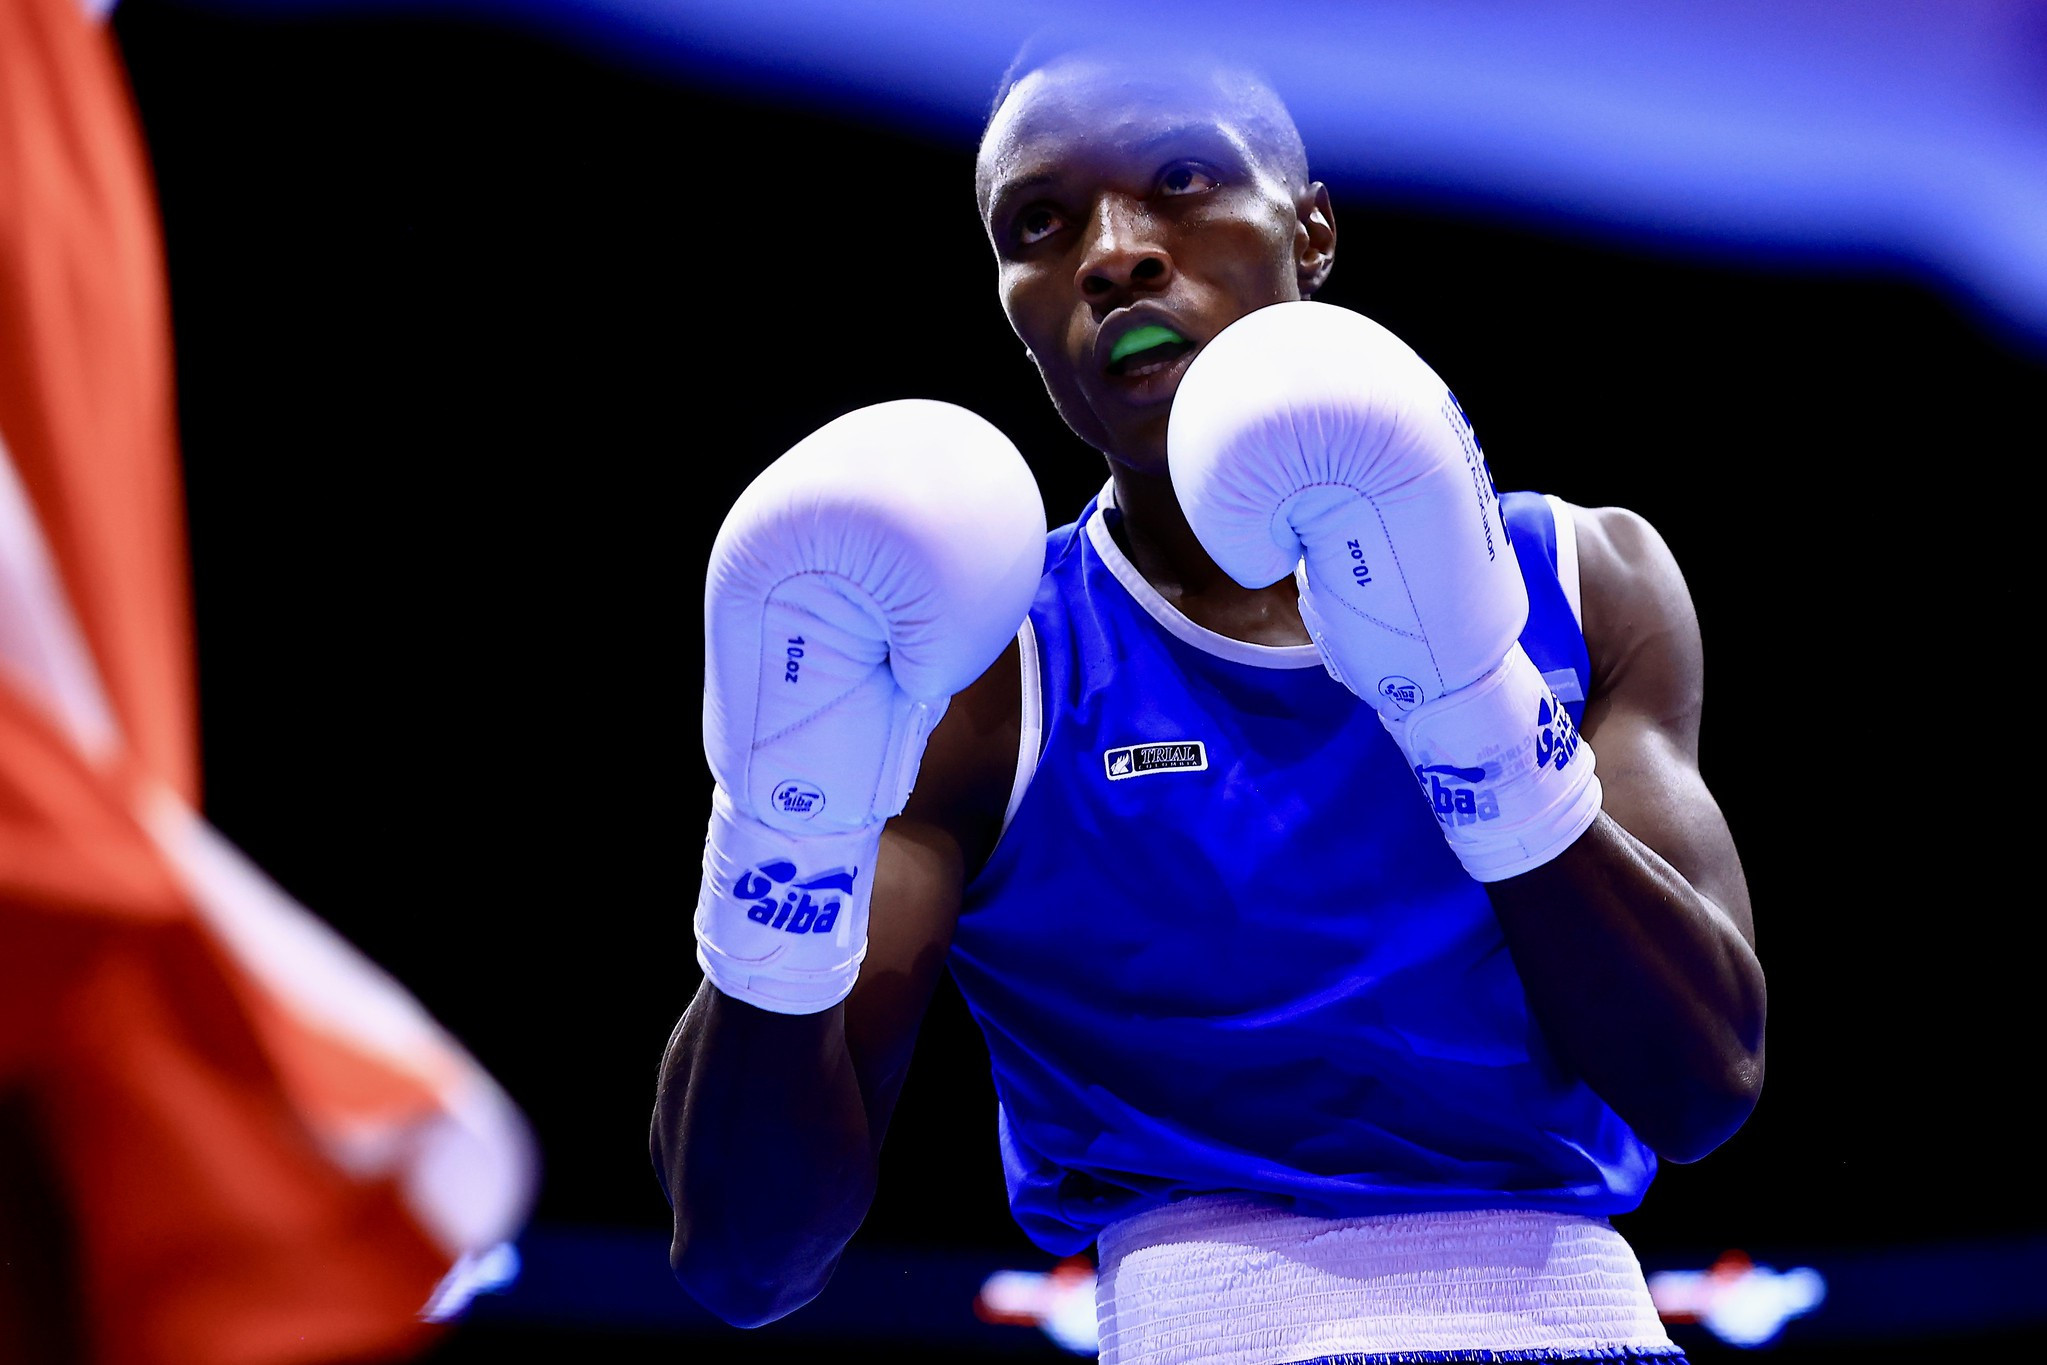 Yilmar Gonzalez was one of the winners on the opening day ©AIBA